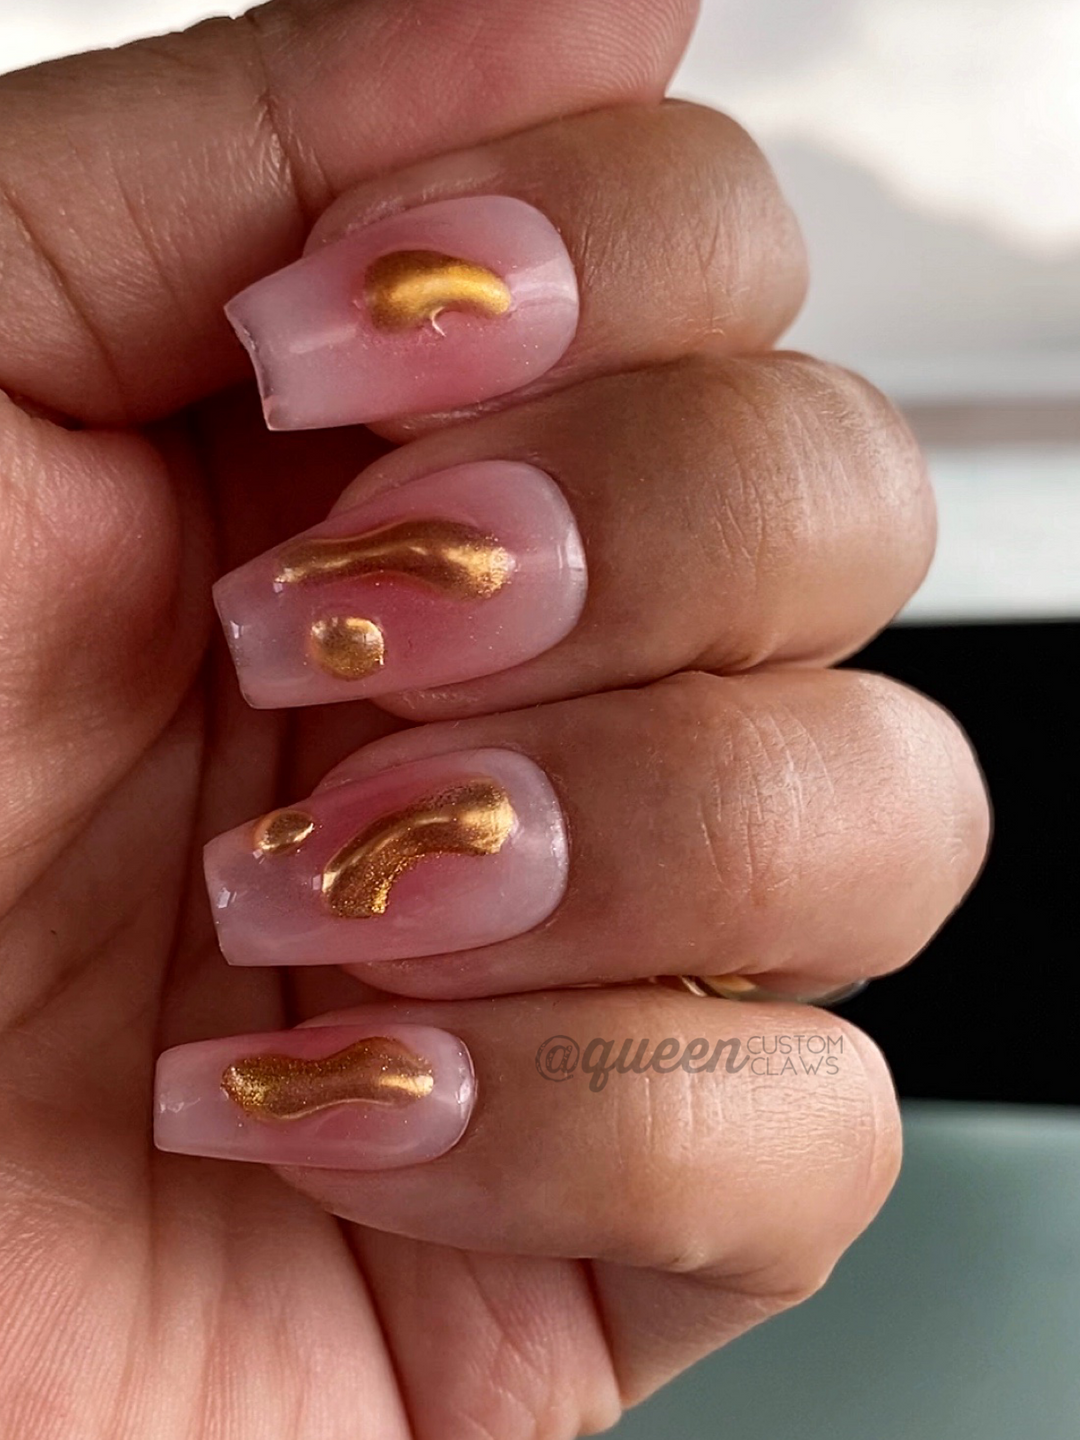 Chrome Ombre Press-on Nails! These trendy 3D chrome blobs will give you an avant-garde style .  blush nude nails with gold 3d blobs